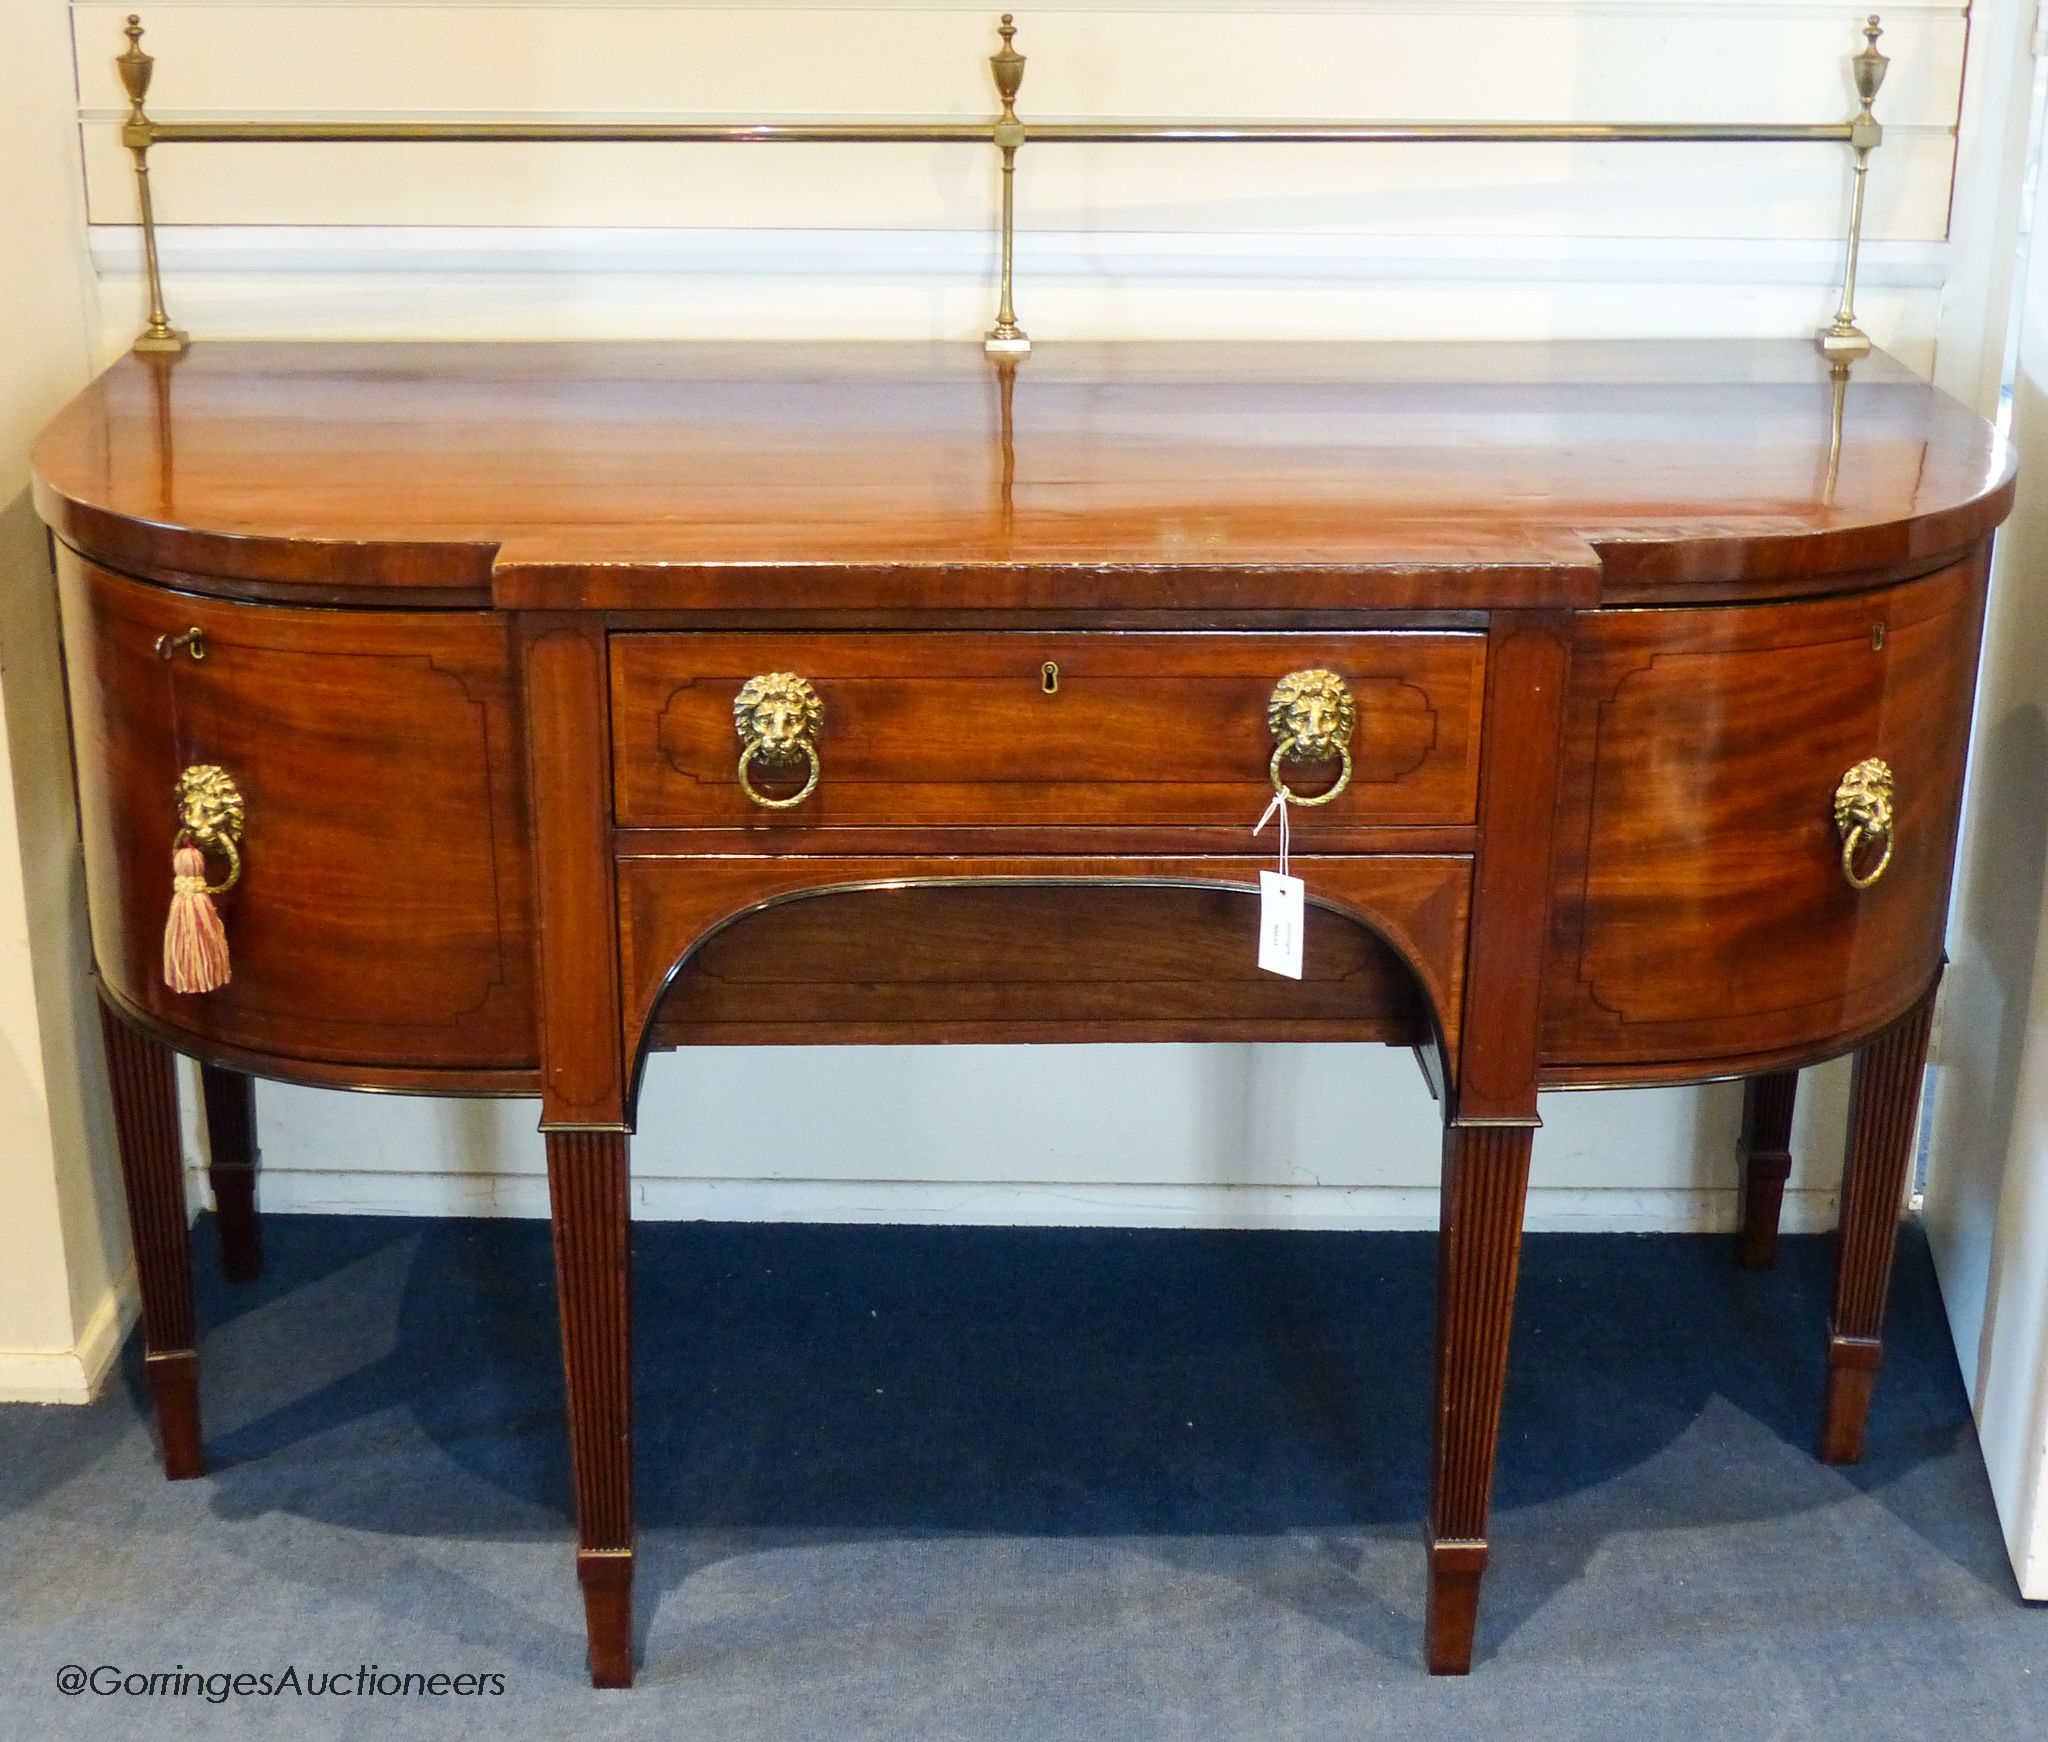 A George III mahogany bow-breakront sideboard, 152cm long, 116.5 cm high to top brass rail, 76 cm deep